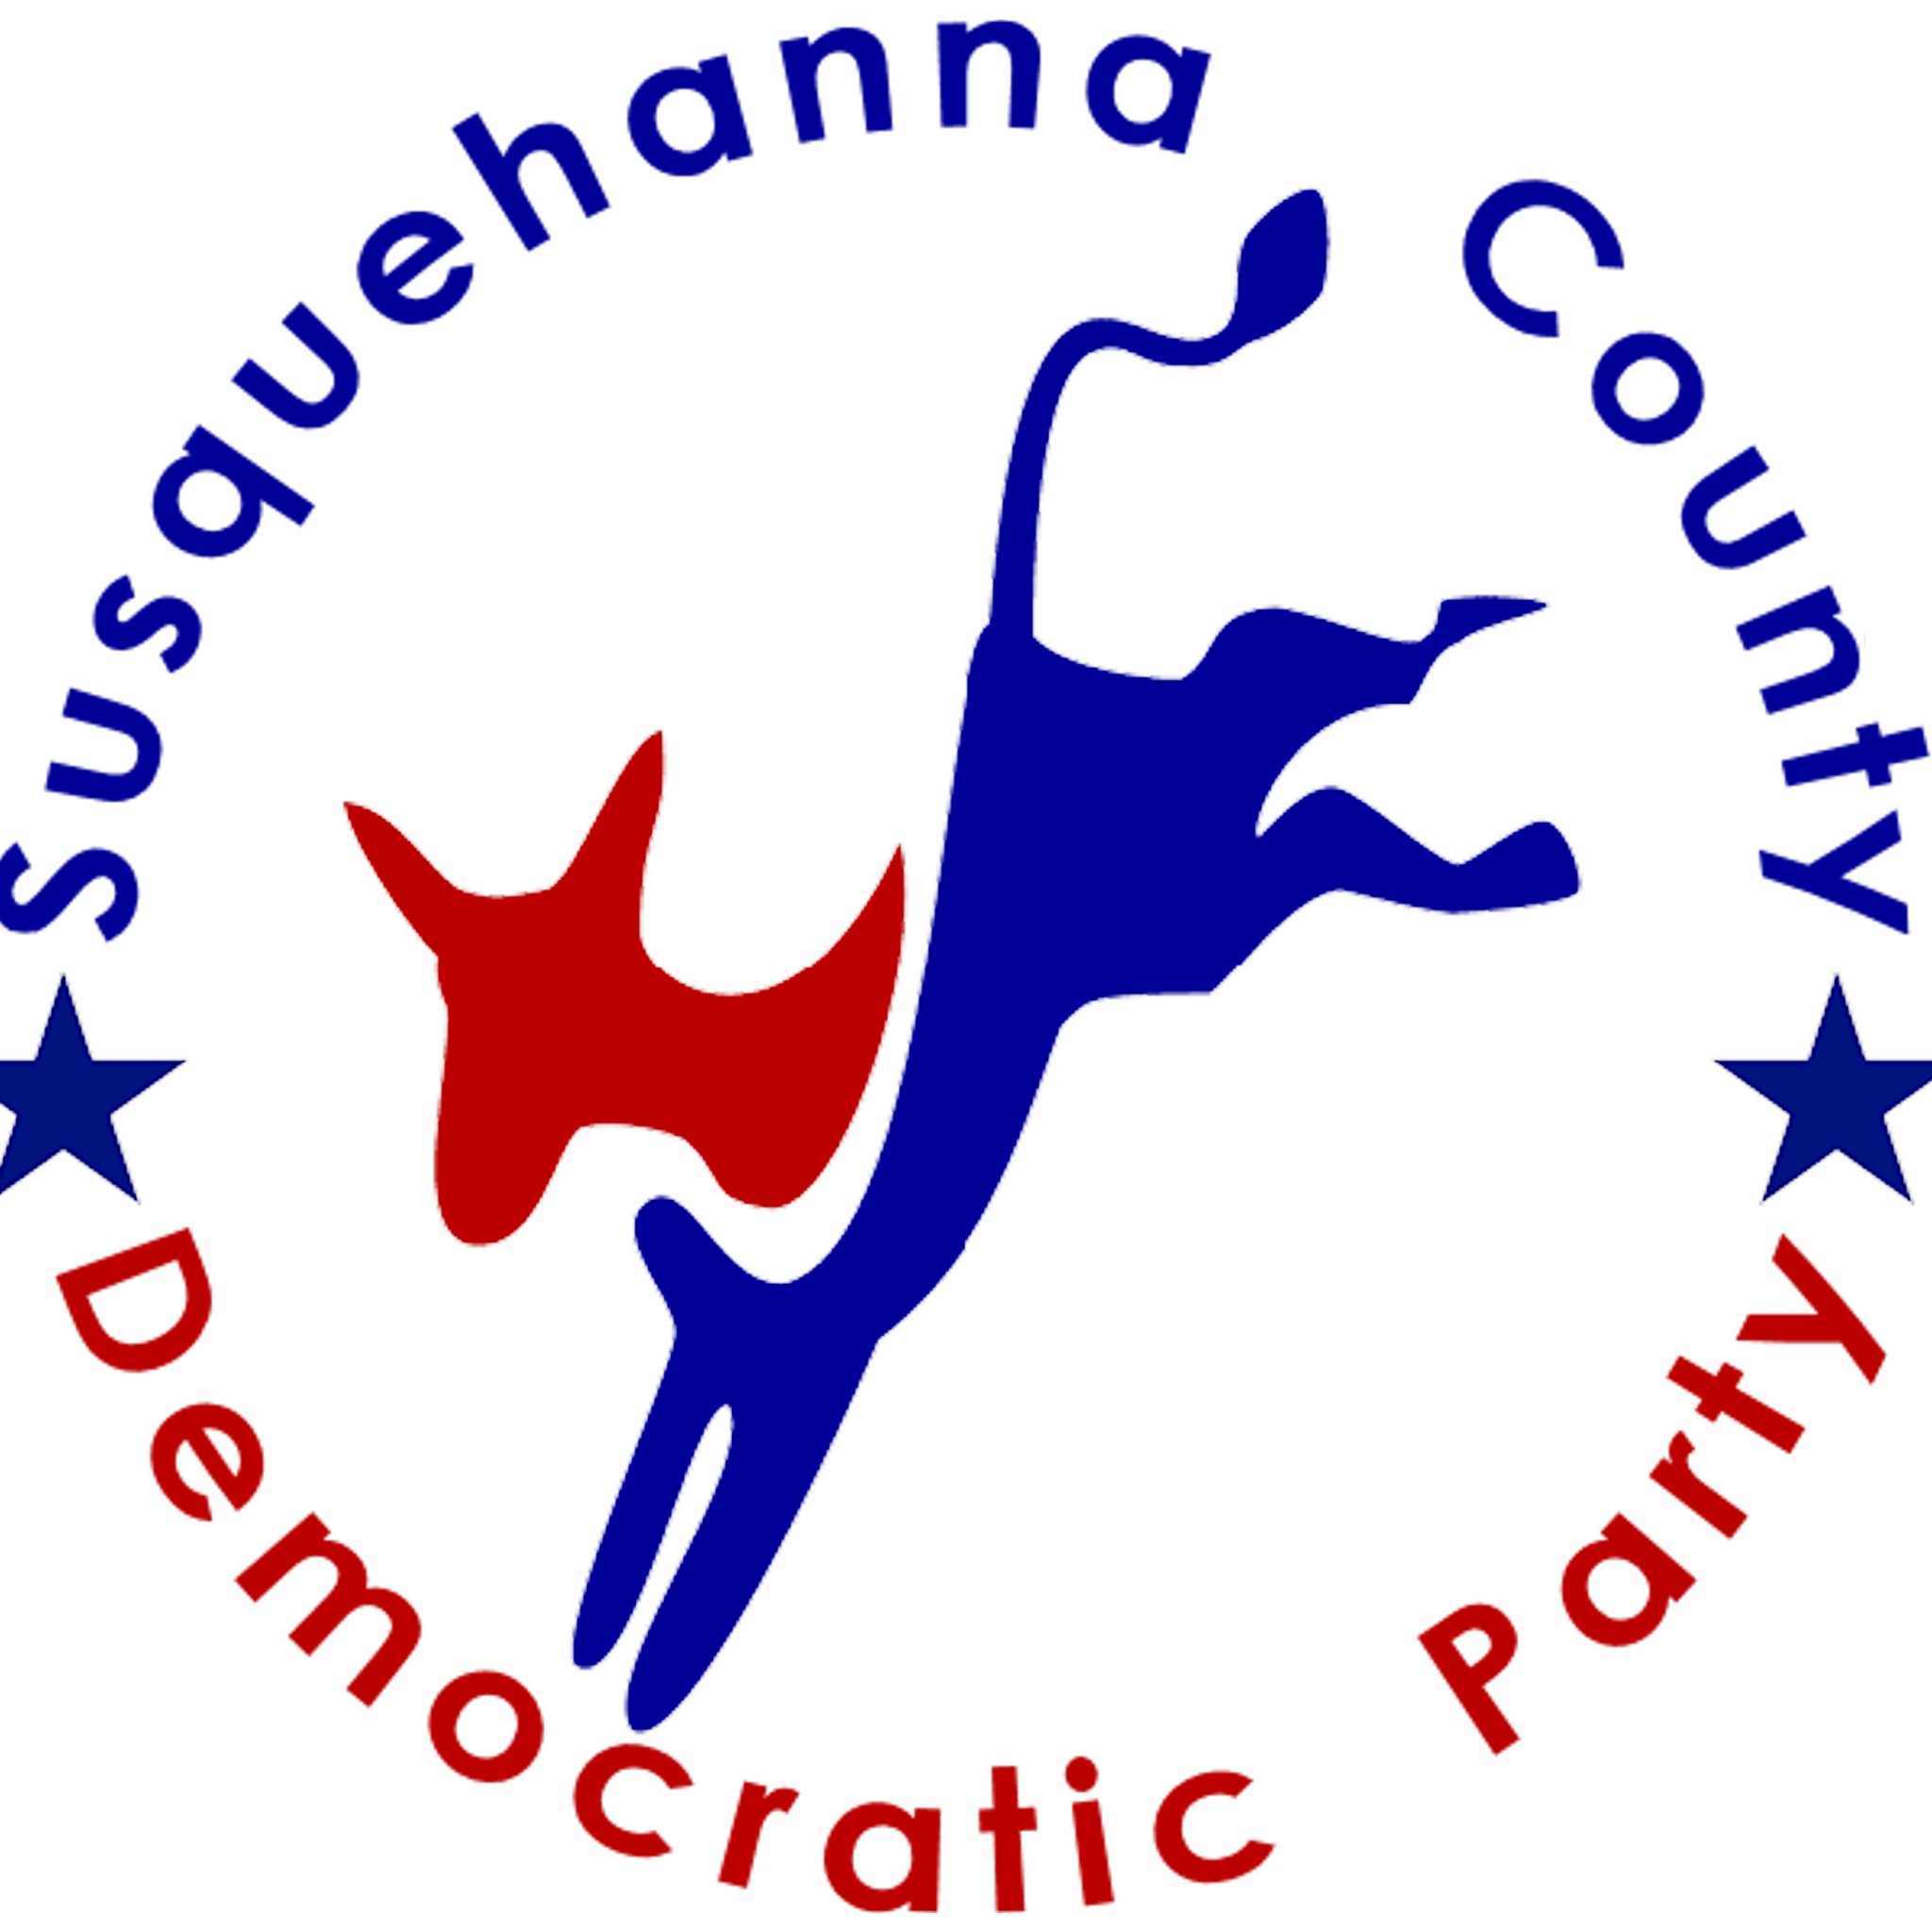 The official twitter of the Susquehanna County Democratic Party